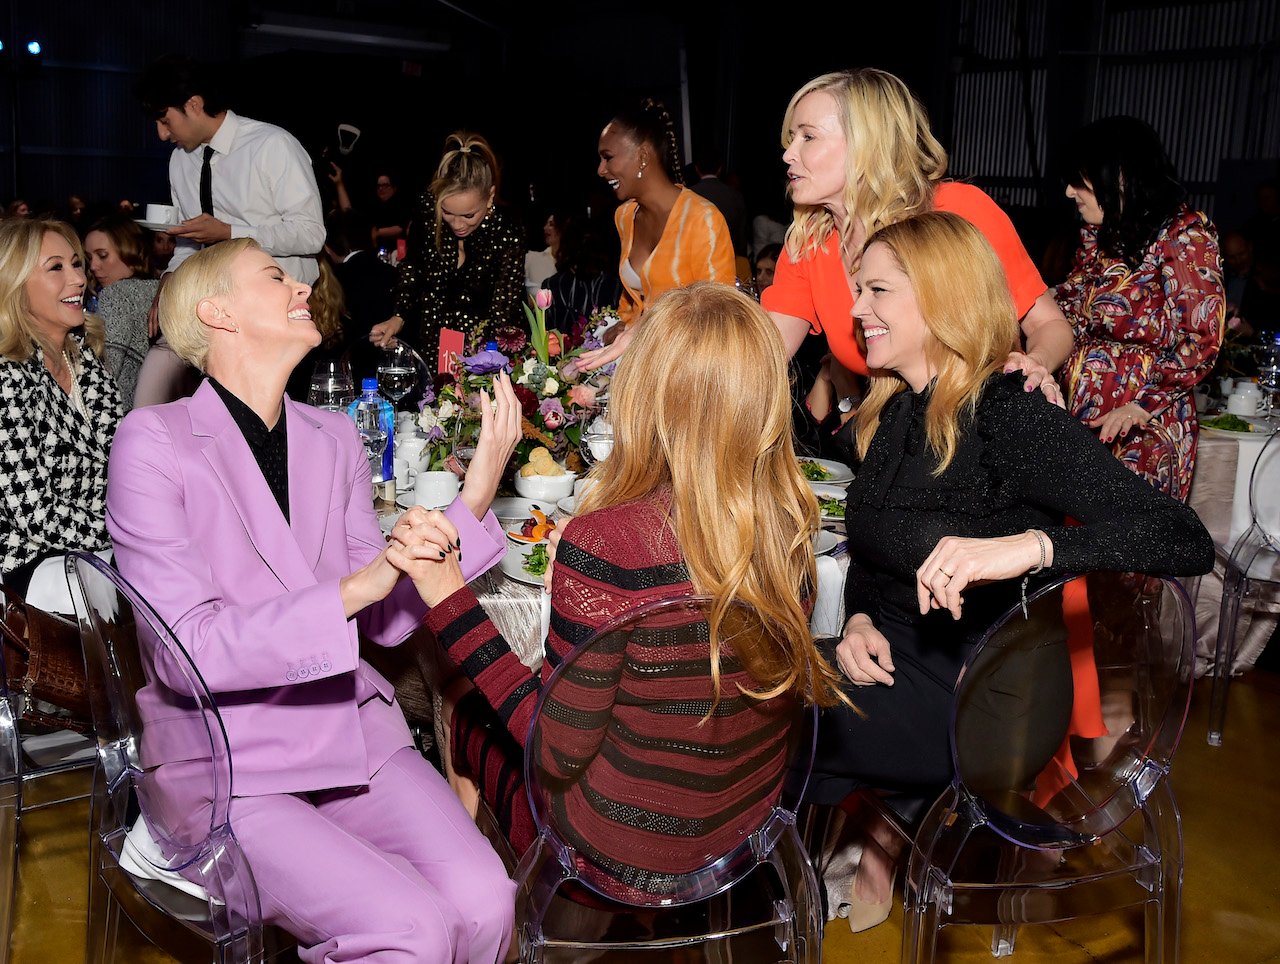 Charlize Theron, Connie Britton, and Mary McCormack are seated at a table, and Chelsea Handler leans over to talk to them